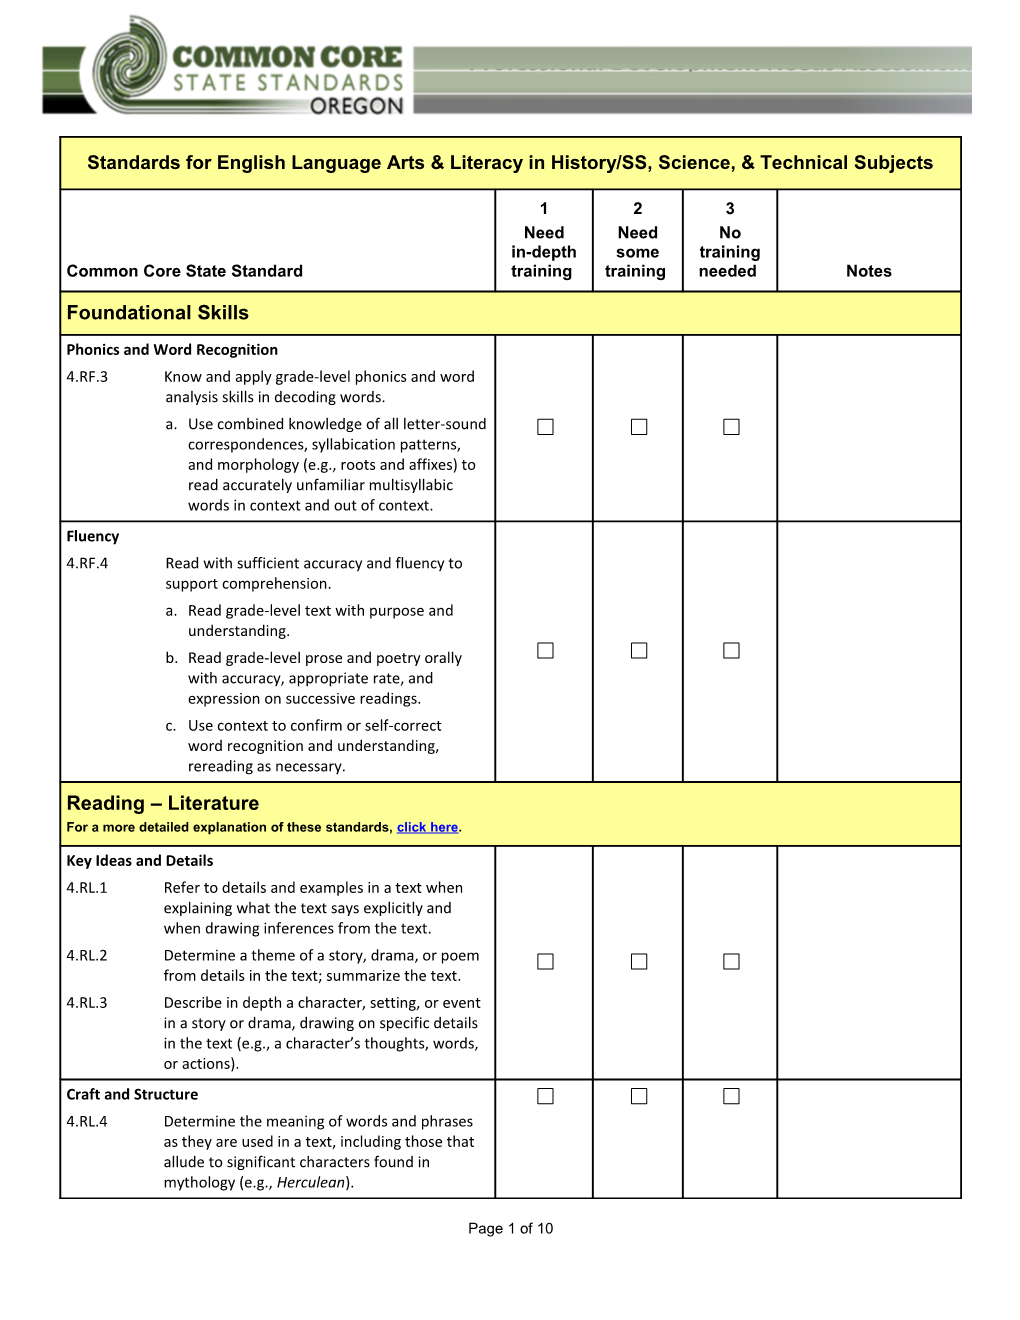 Standards for English Language Arts & Literacy in History/SS, Science, & Technical Subjects